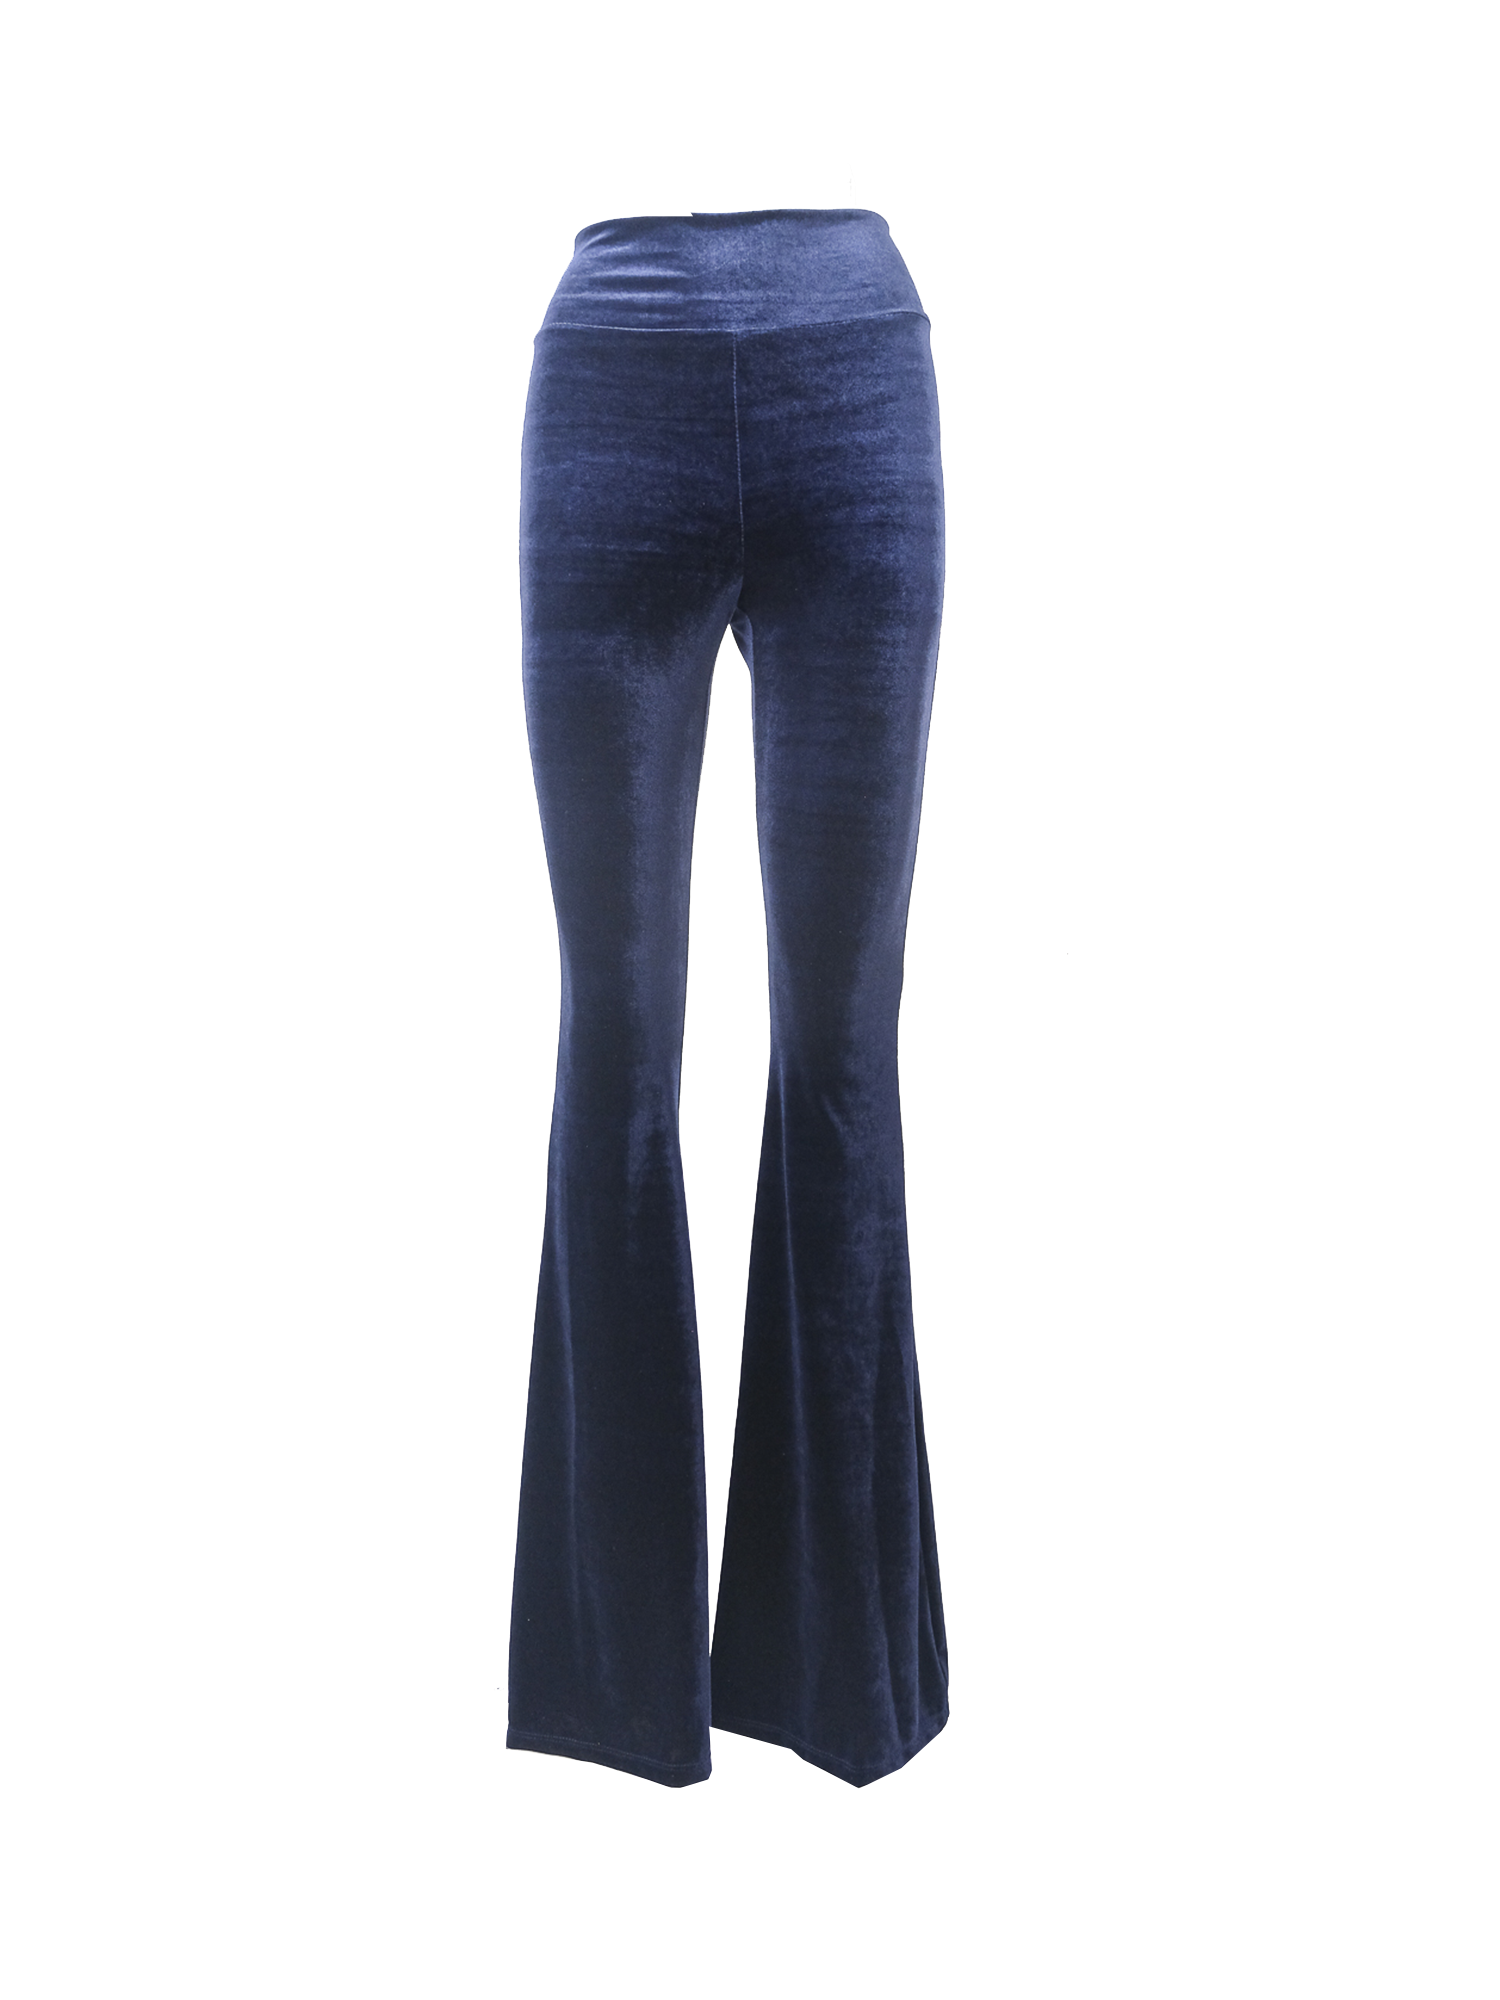 LOLA - flared trousers with high waist in blue chenille